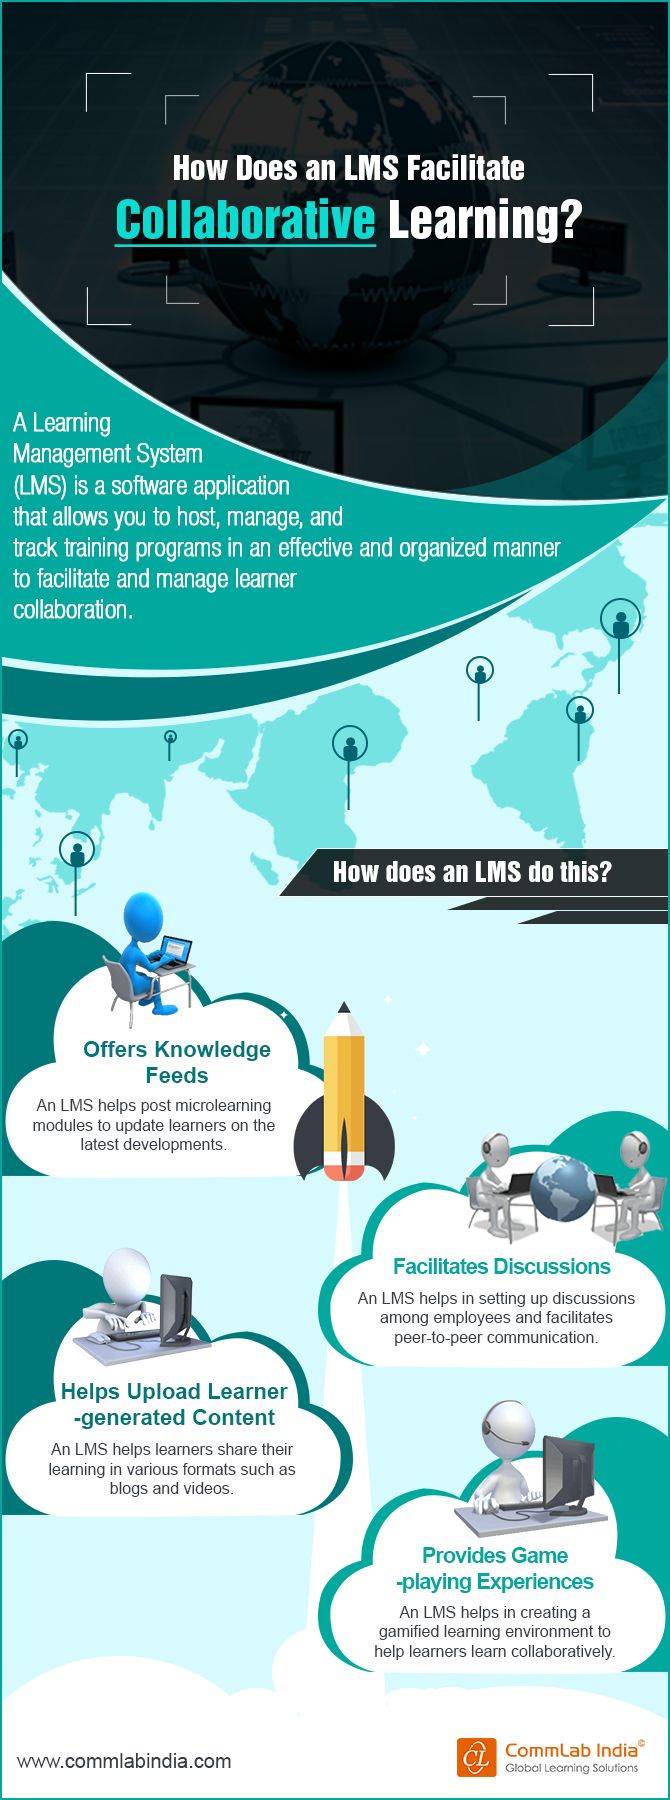 How does an LMS facilitate collaborative learning?